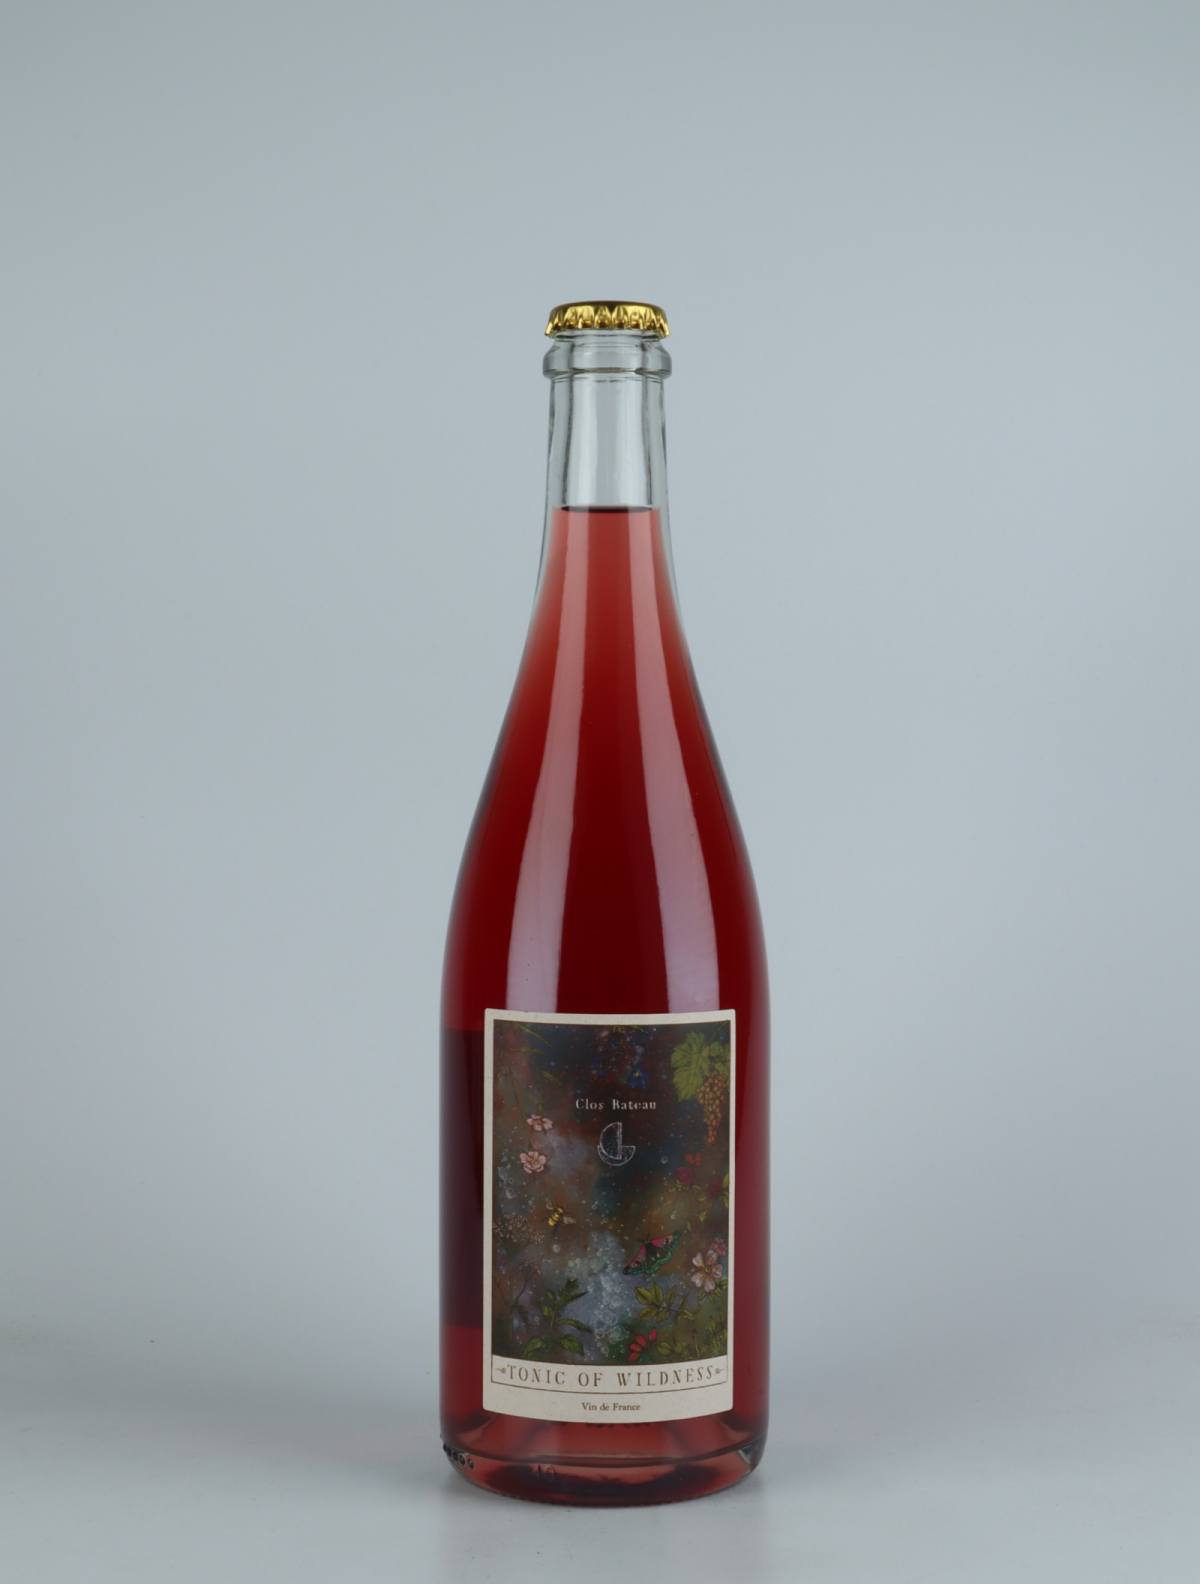 A bottle 2020 Tonic of Wildness Sparkling from Clos Bateau, Beaujolais in France